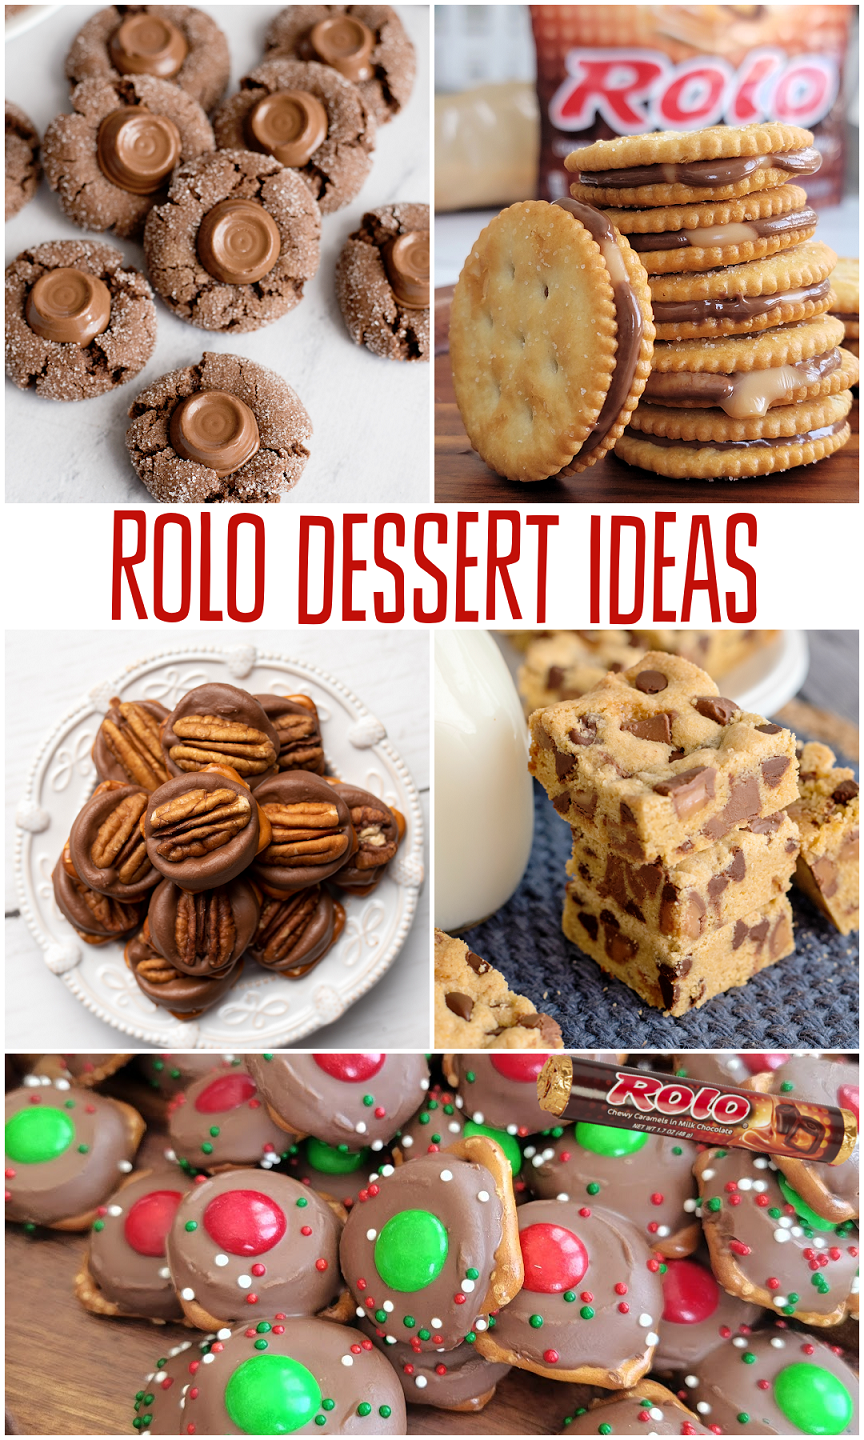 Rolo Dessert Ideas – What Can I Make with Rolos?